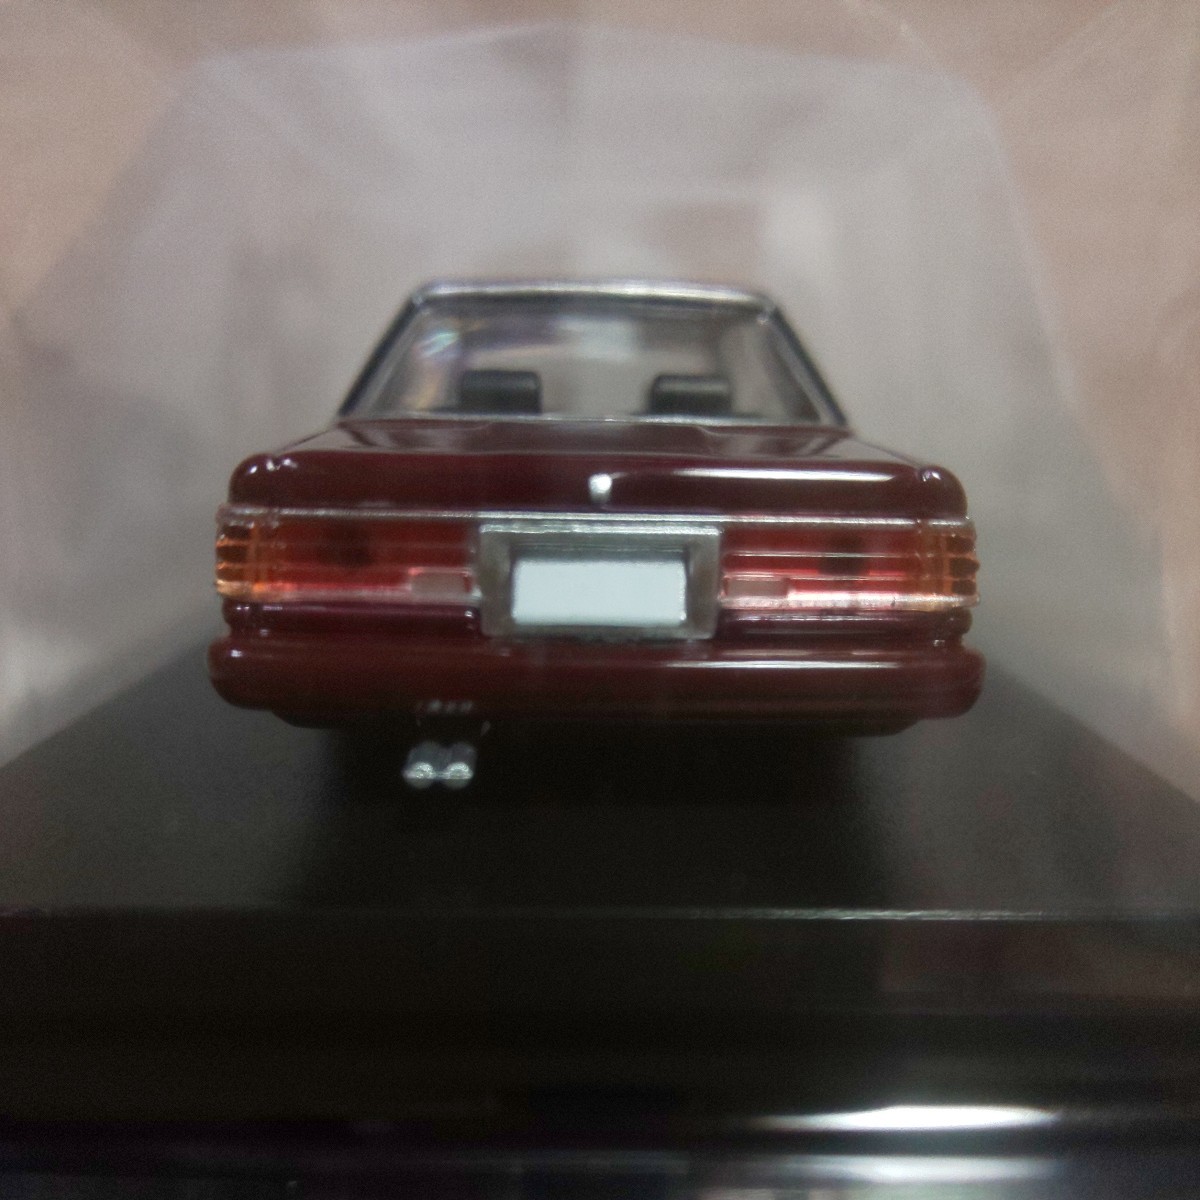 GX71 Aoshima 1/64gla tea n no. 12.71 Mark Ⅱ 1987 year ② tea color Long Champ manner Brown old car association high speed have lead latter term type 